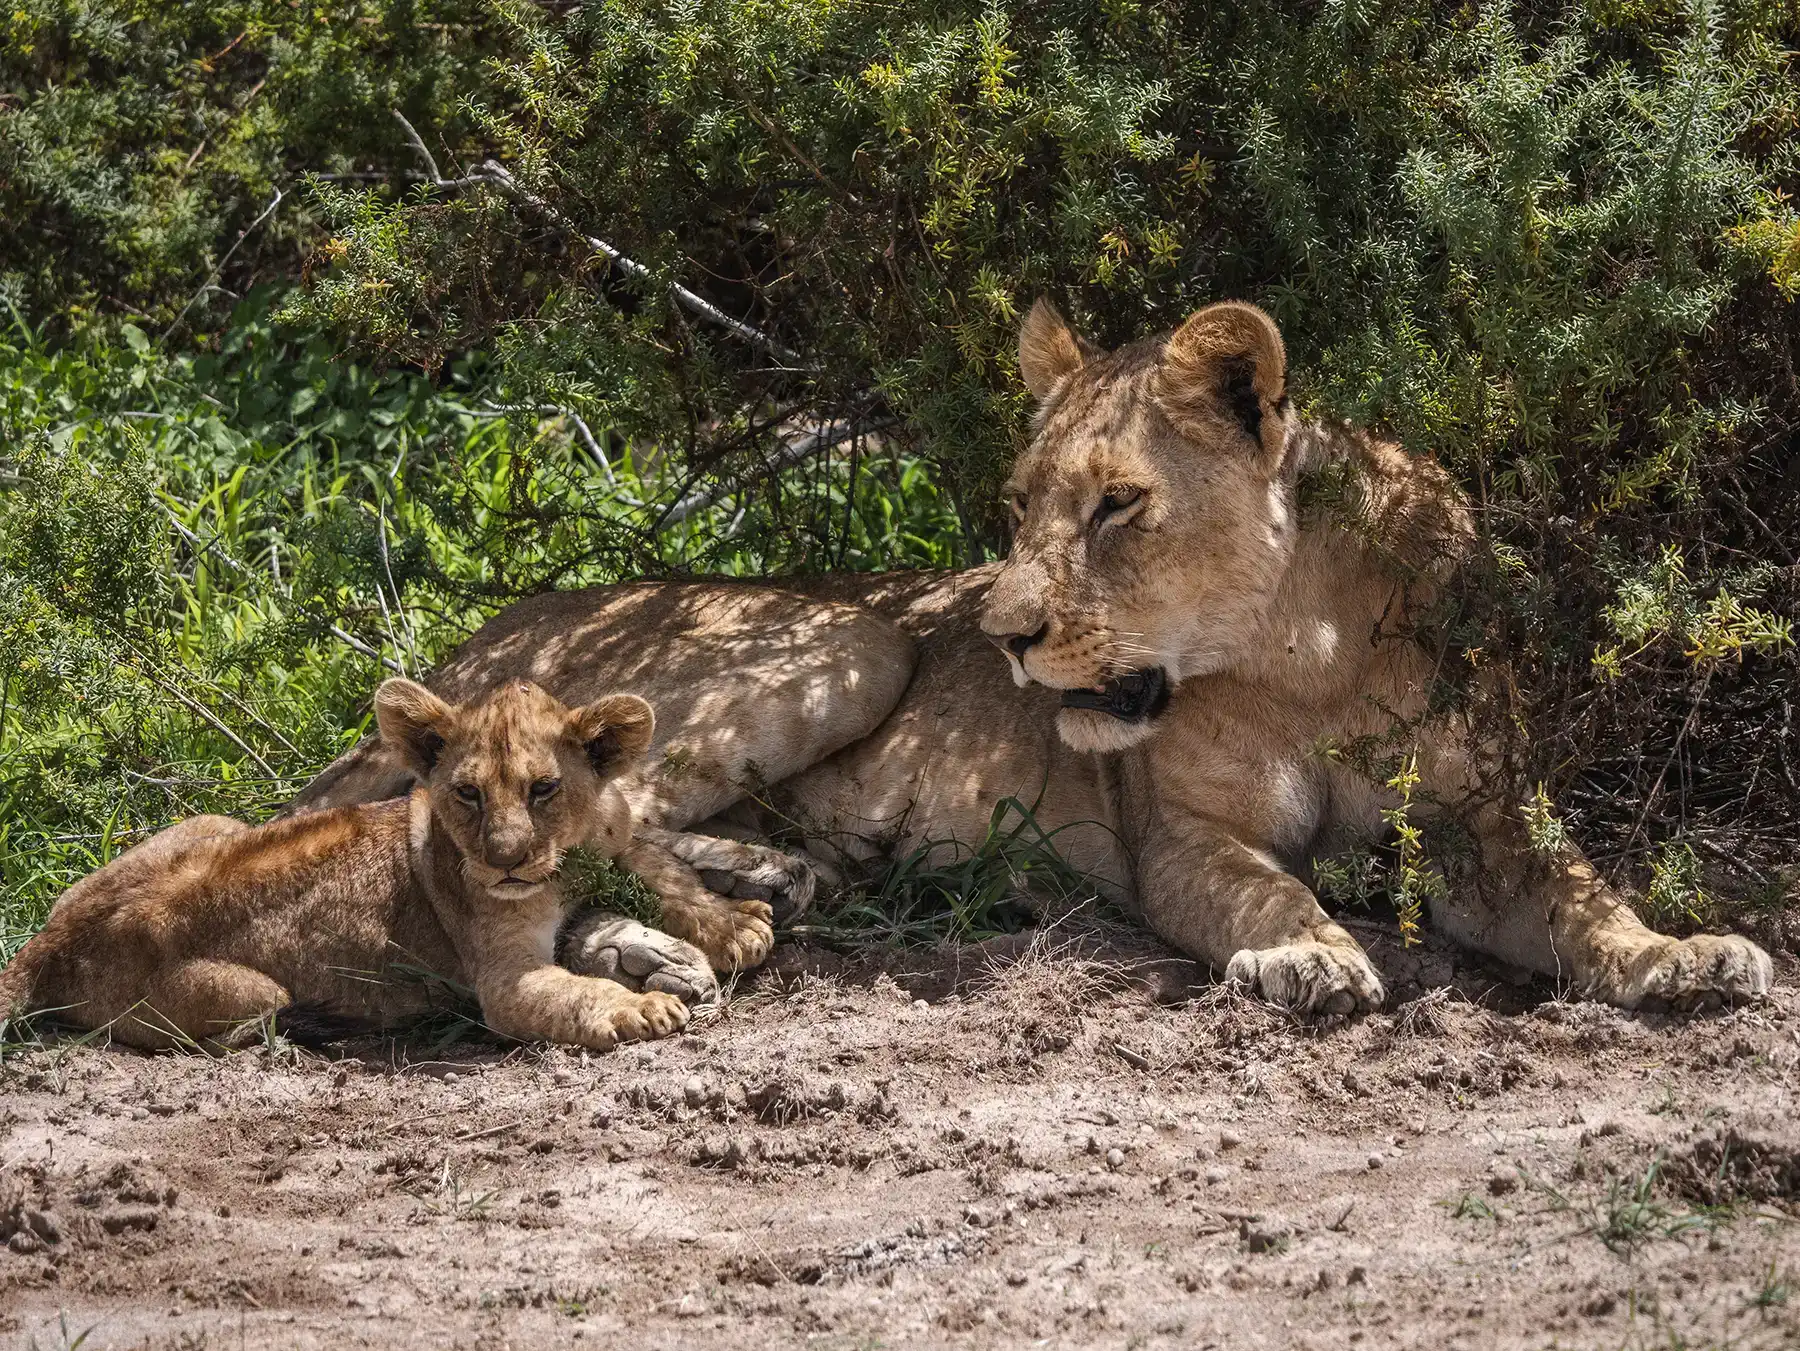 Lioness with a young cub in Amboseli National Park